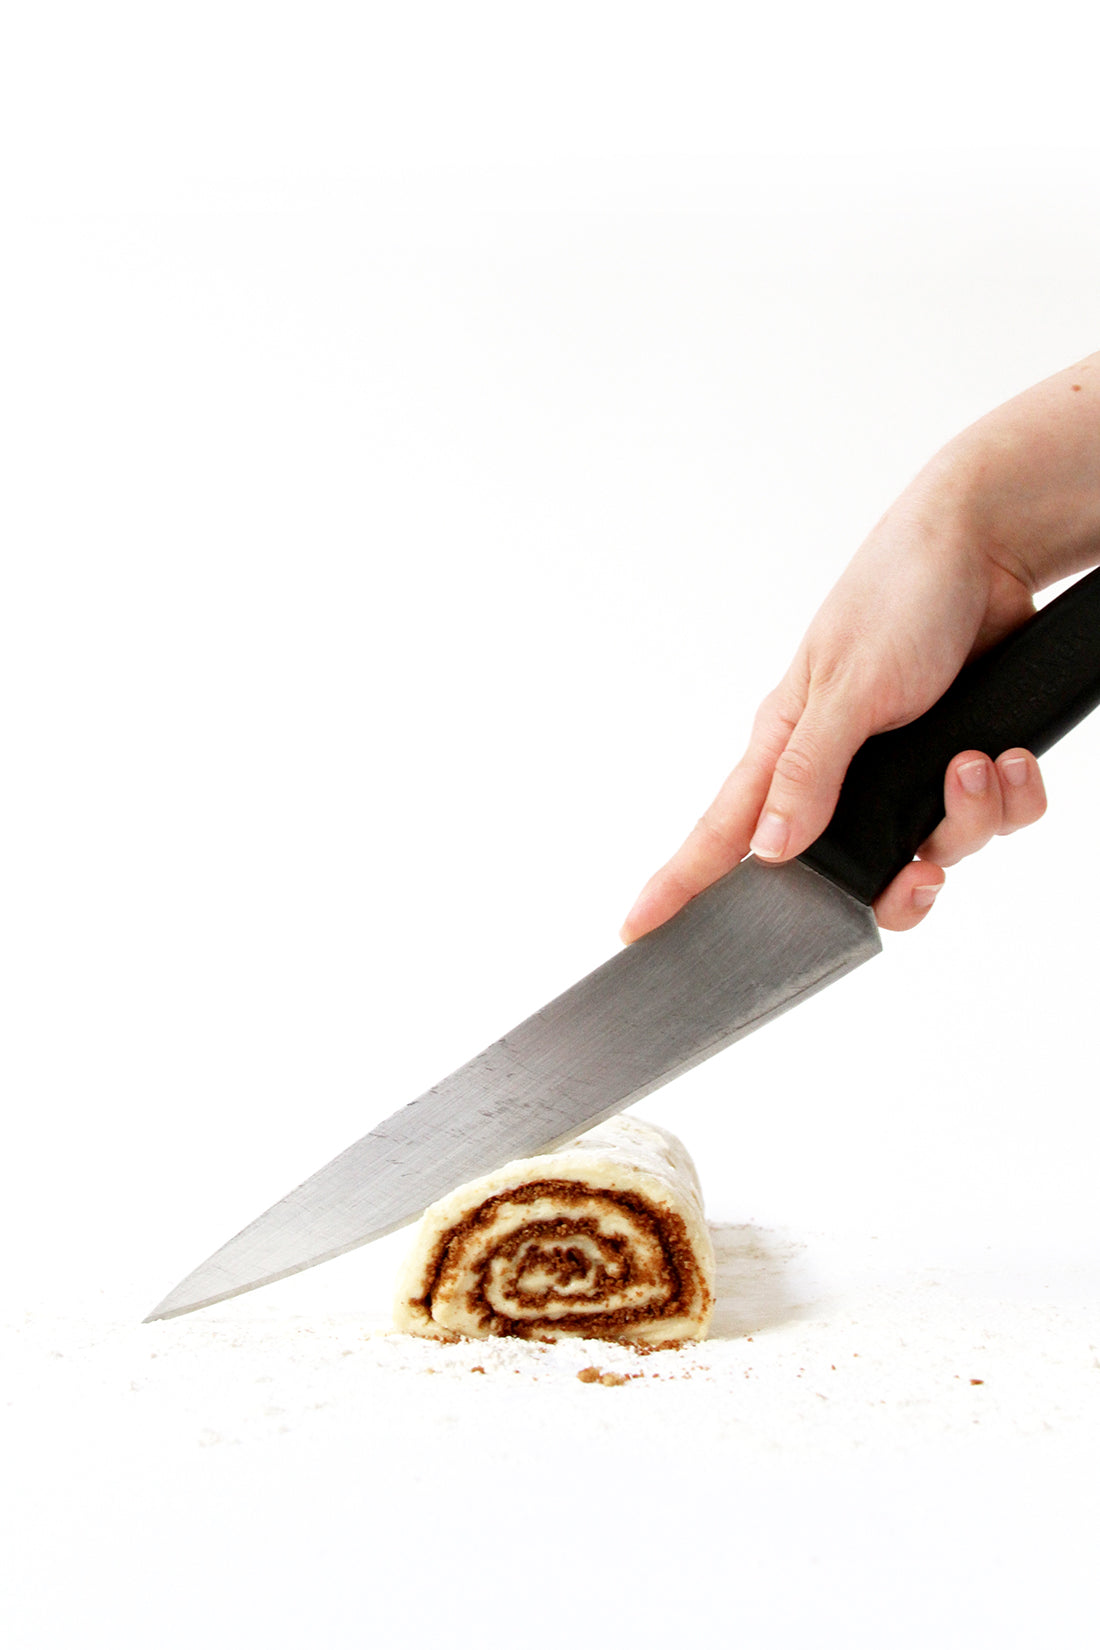 Image of Miss Jones Baking Co Cake Mix Cinnamon Rolls in a log being cut by a knife into pieces